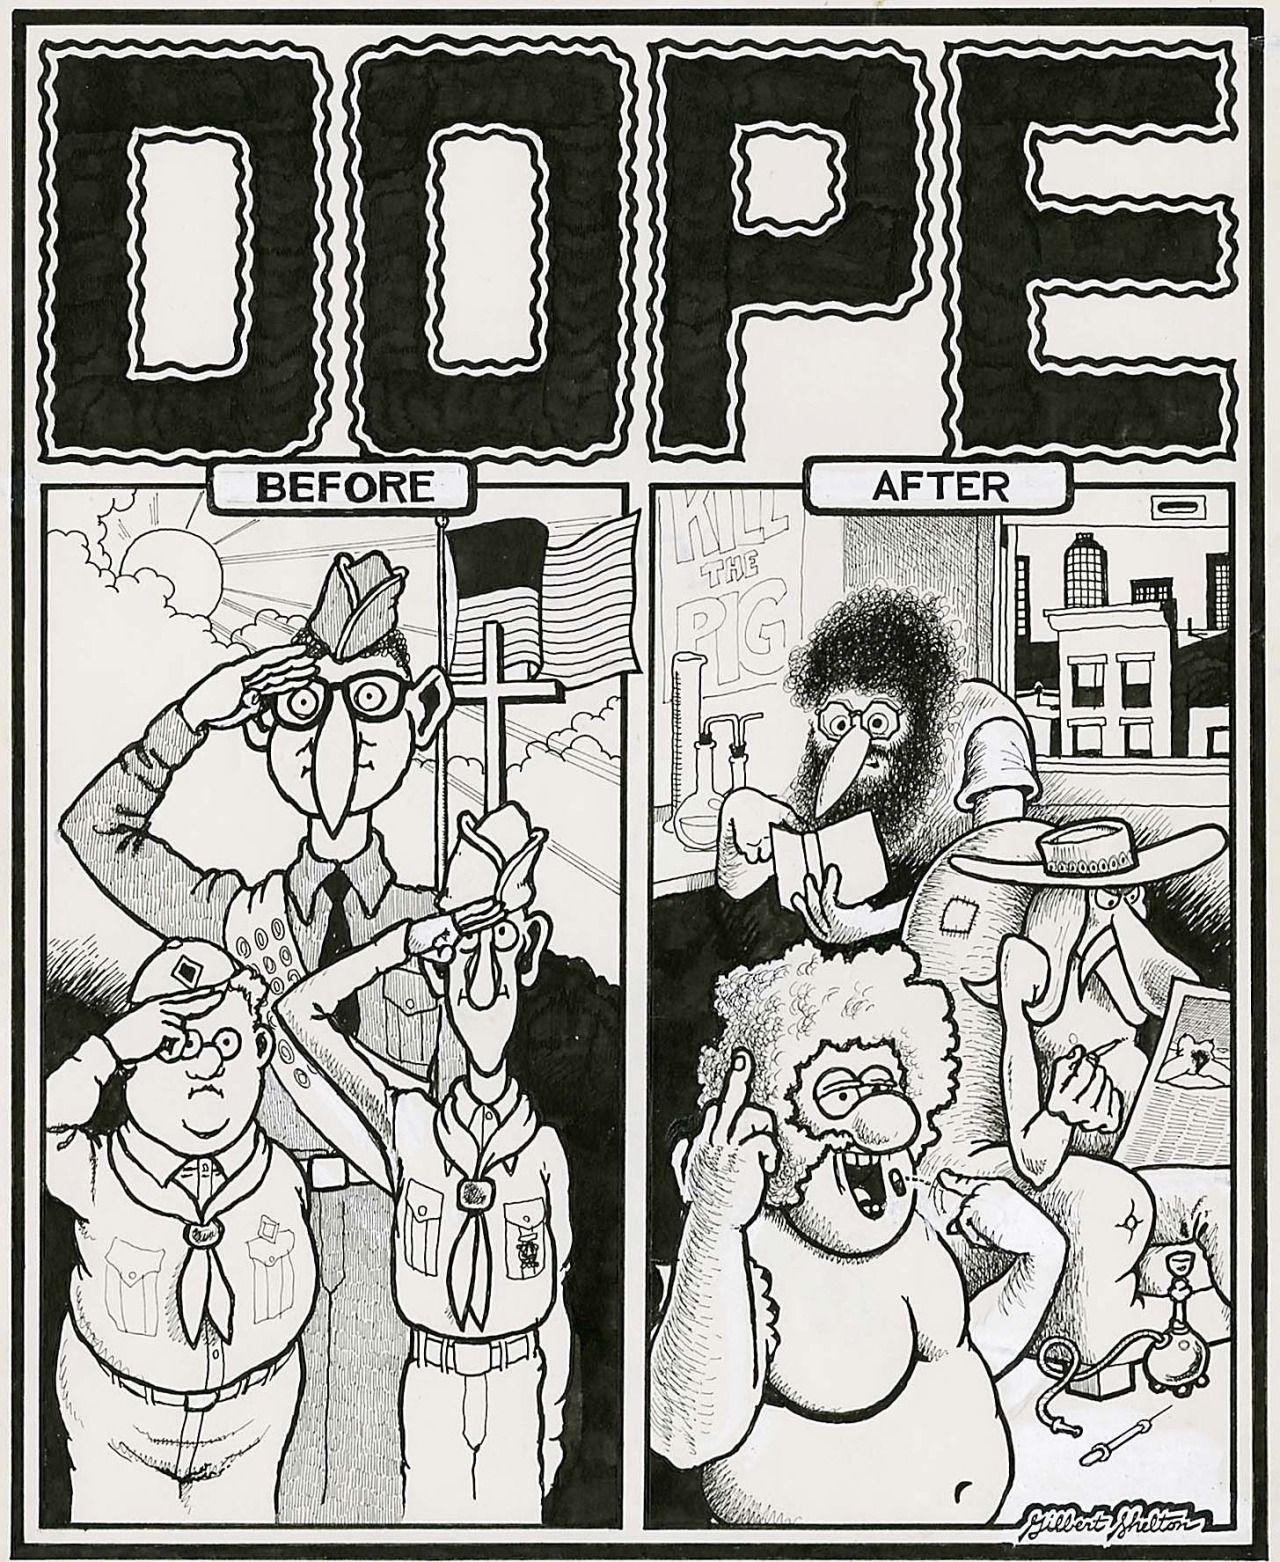 Gilbert Shelton from the back cover to underground classic